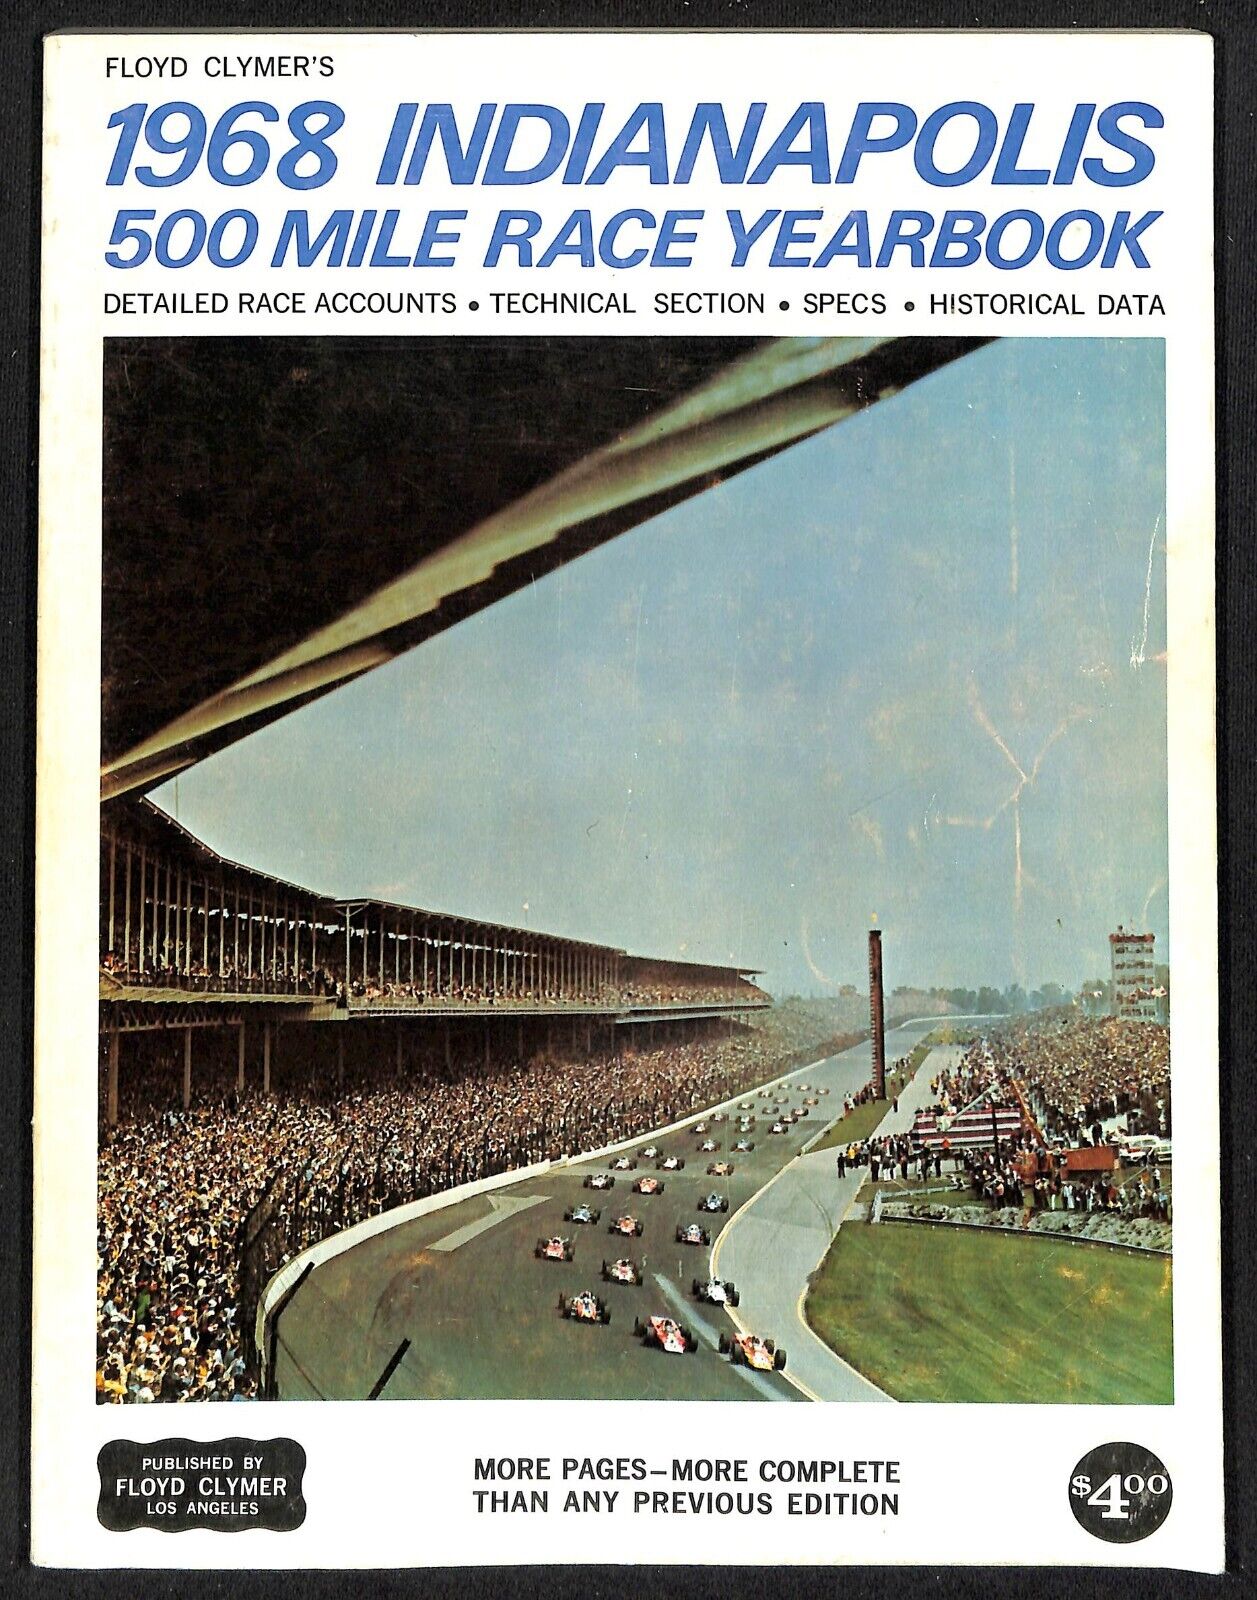 1968 Indy 500 Floyd Clymer's Indianapolis Yearbook IMS 191pp 